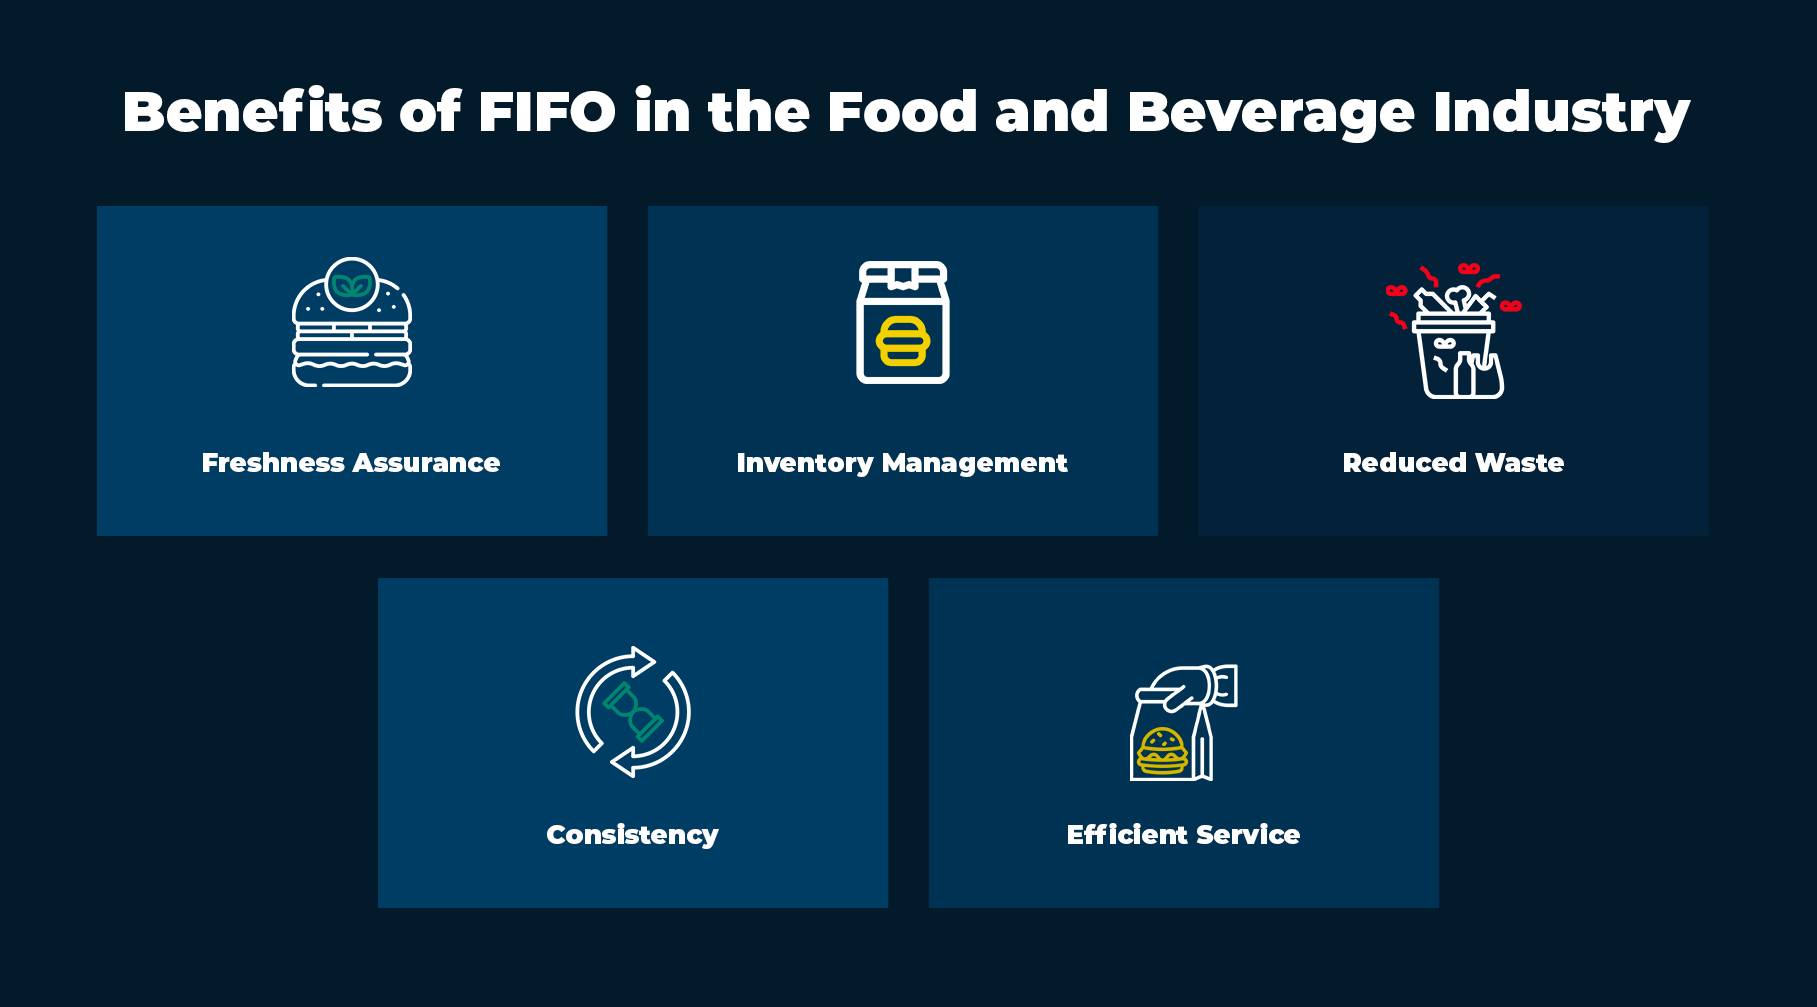 Benefits of FIFO in the Food and Beverage Industry